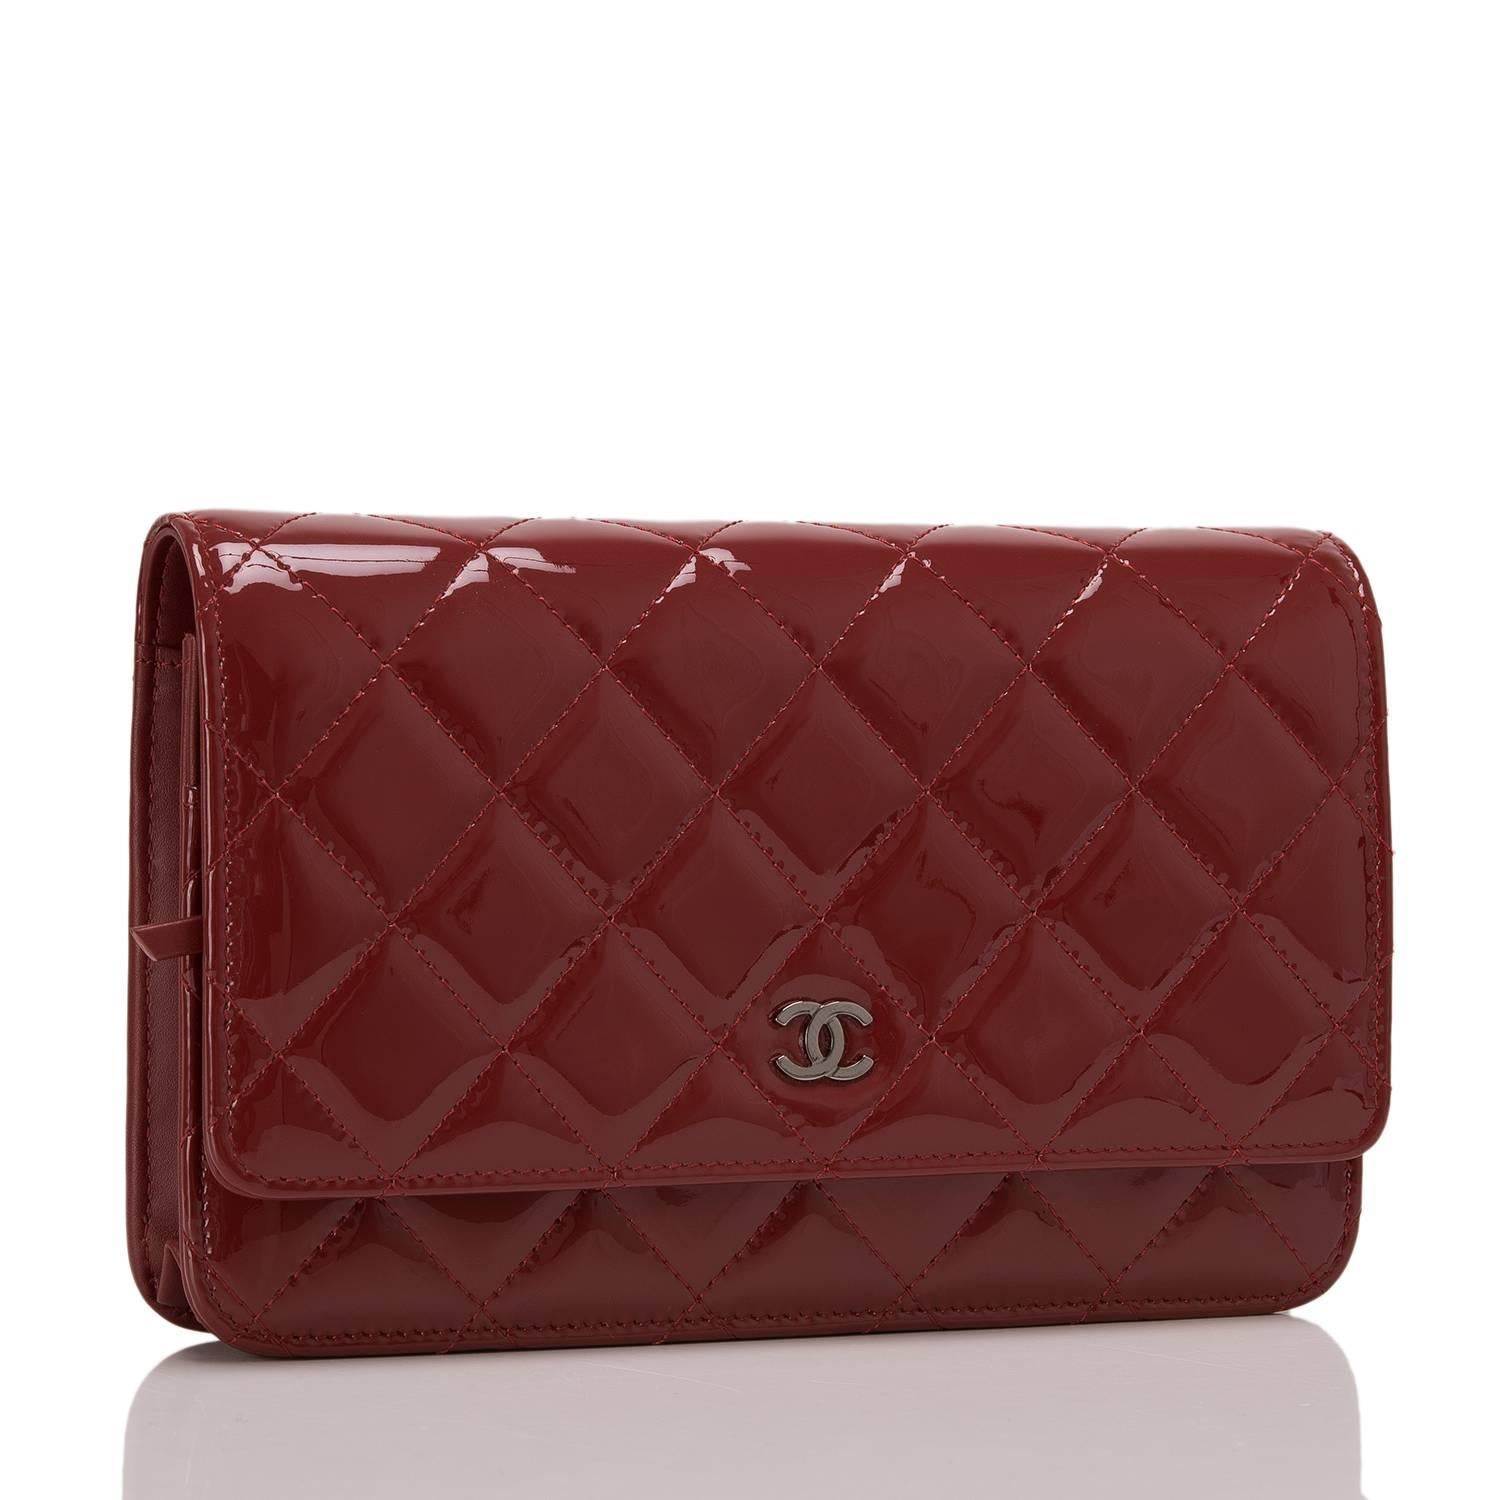 This dark red quilted patent timeless WOC with ruthenium hardware features signature Chanel quilting, front flap with CC charm and hidden snap closure, expandable sides and bottom, half moon rear pocket and interwoven ruthenium chain and leather